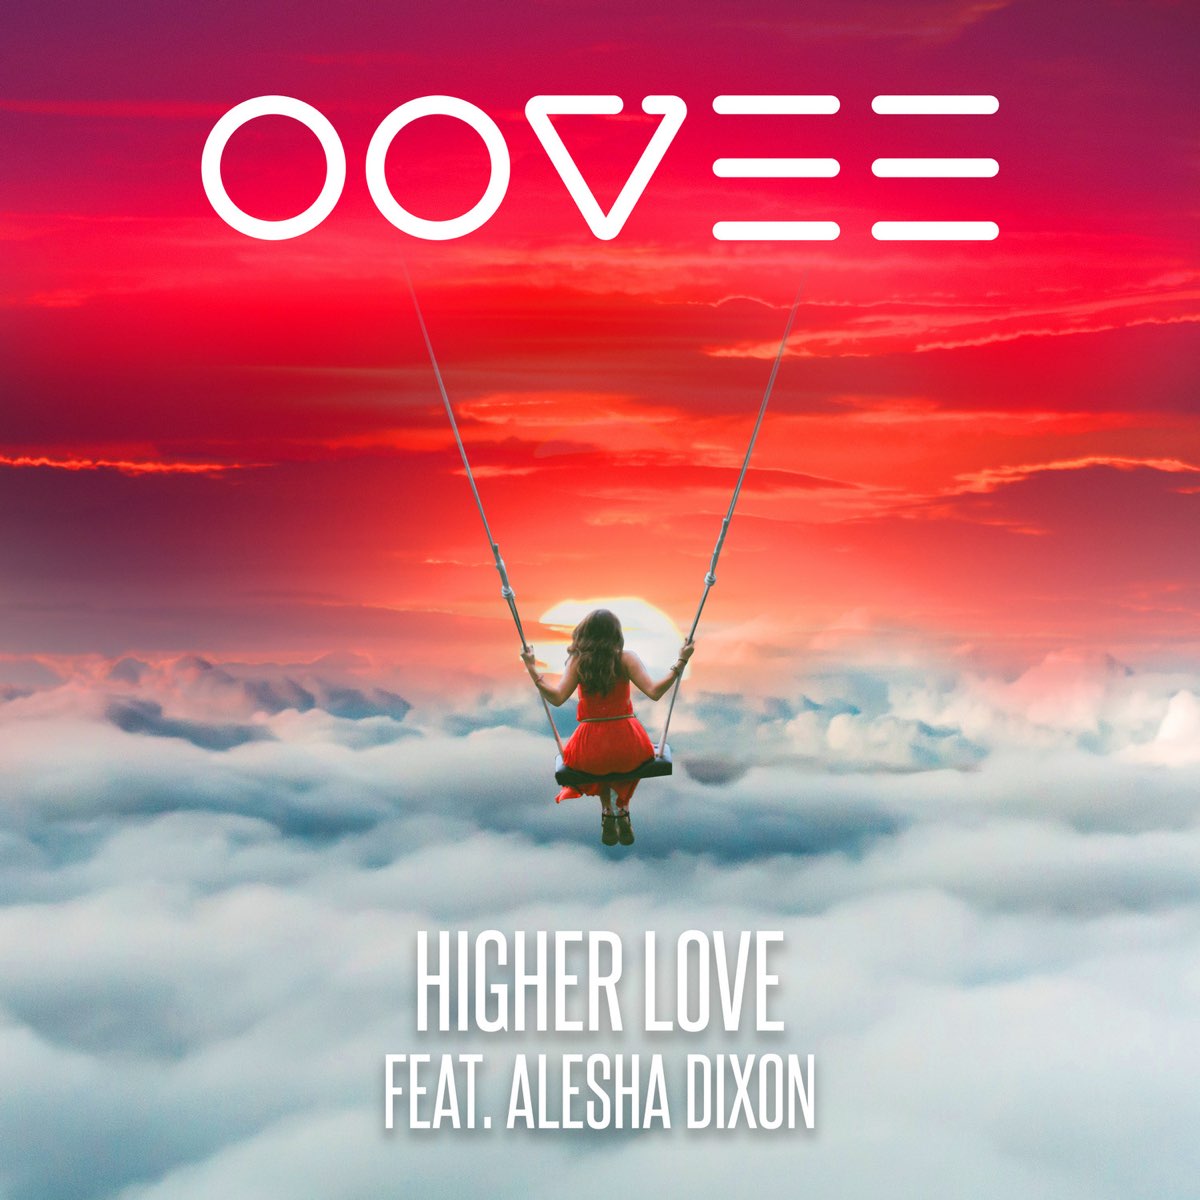 O higher and higher. Обложка higher. Higher Love. Oovee. FATFOONT - higher Love картинка.